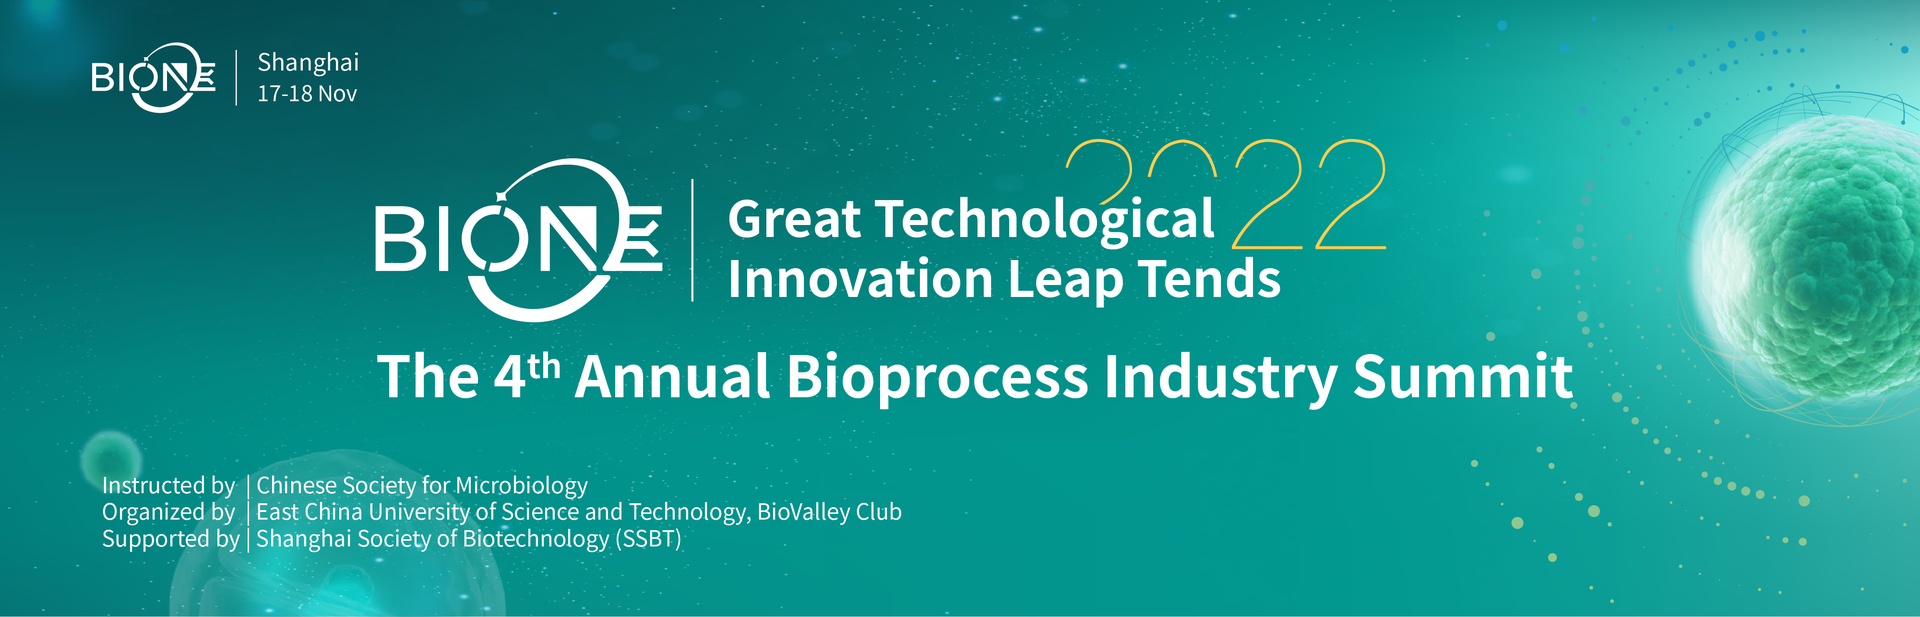 The 4th Annual Bioprocess Industry Summit